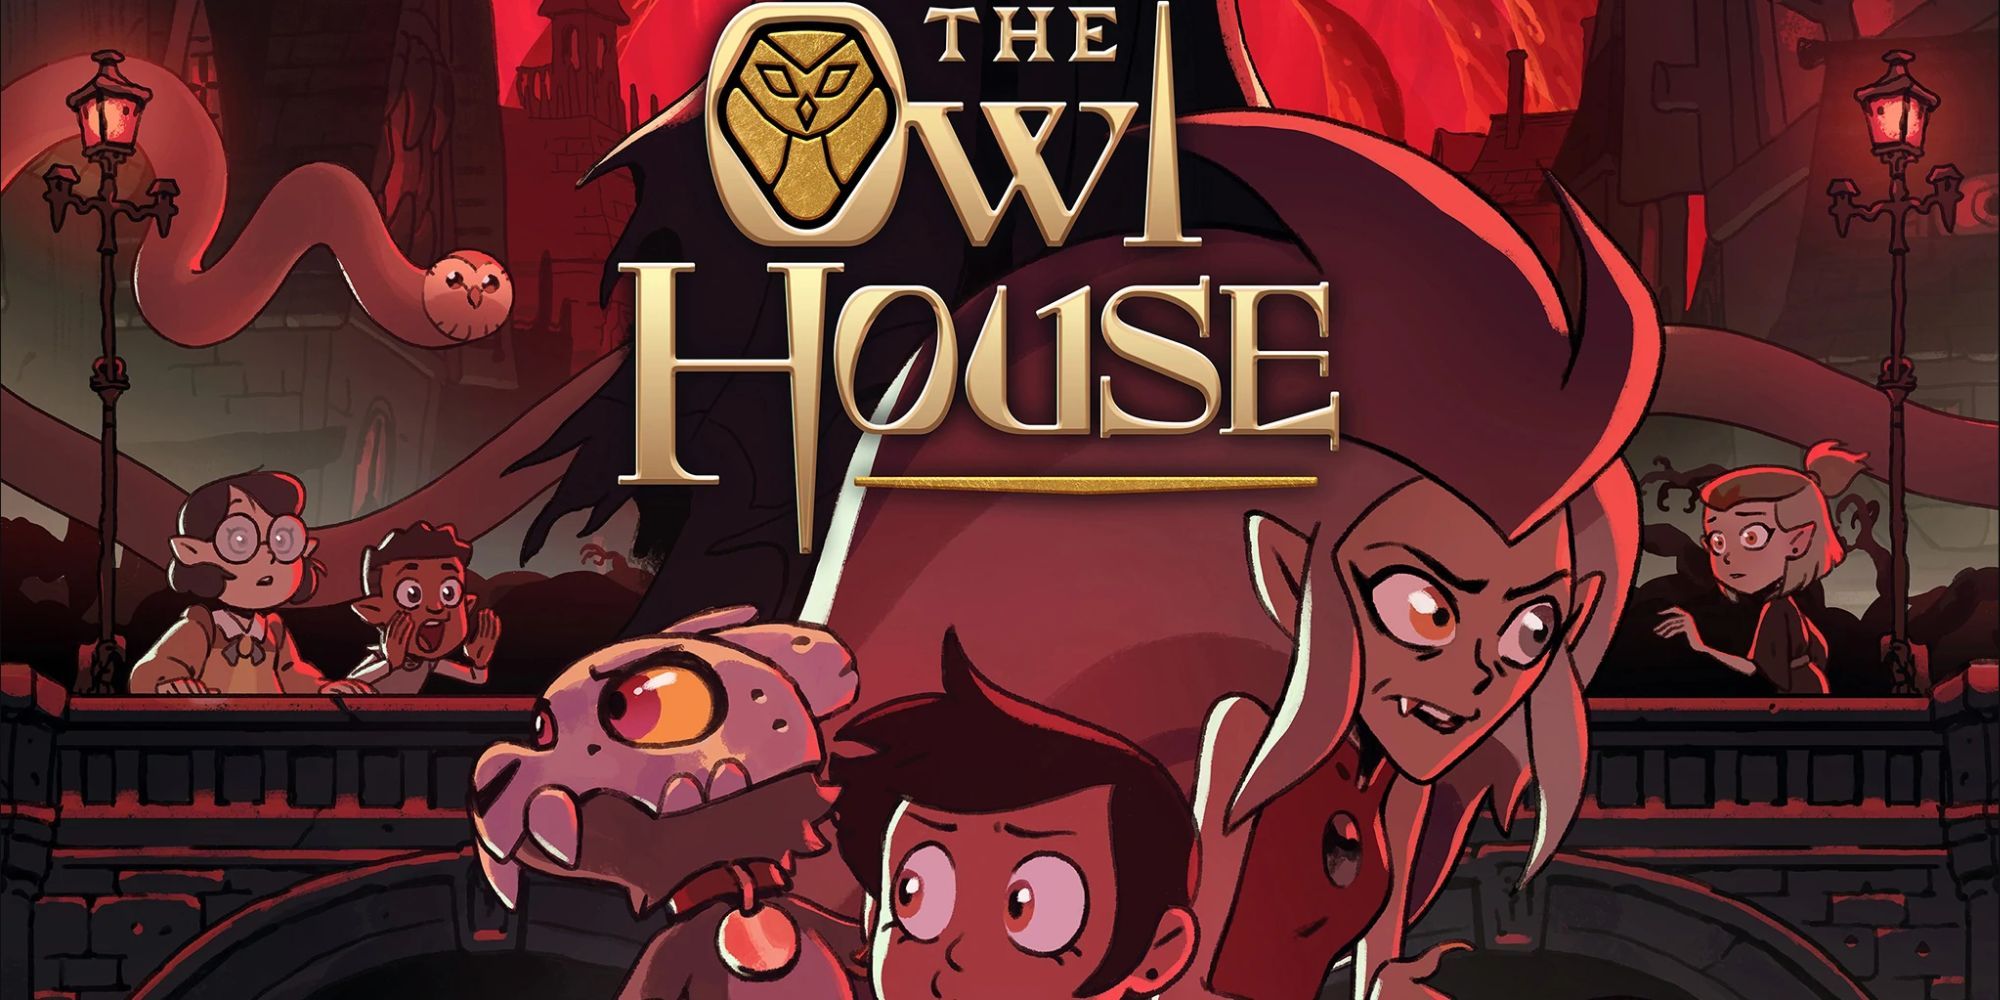 Disney Channel's 'Owl House' Gets Early Season 2 Order (Exclusive